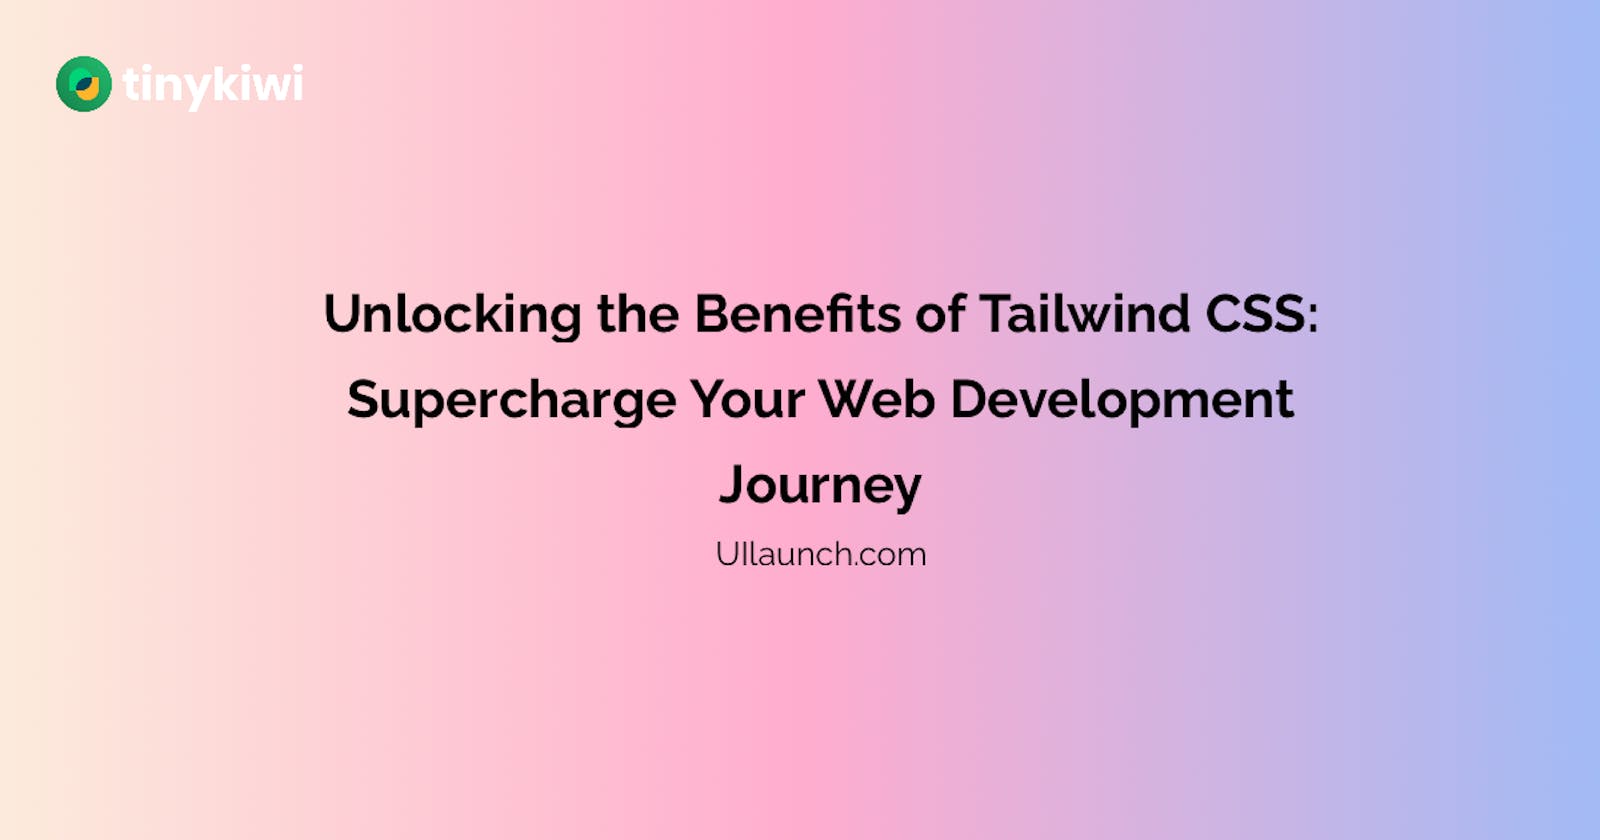 Unlocking the Benefits of Tailwind CSS: Supercharge Your Web Development Journey